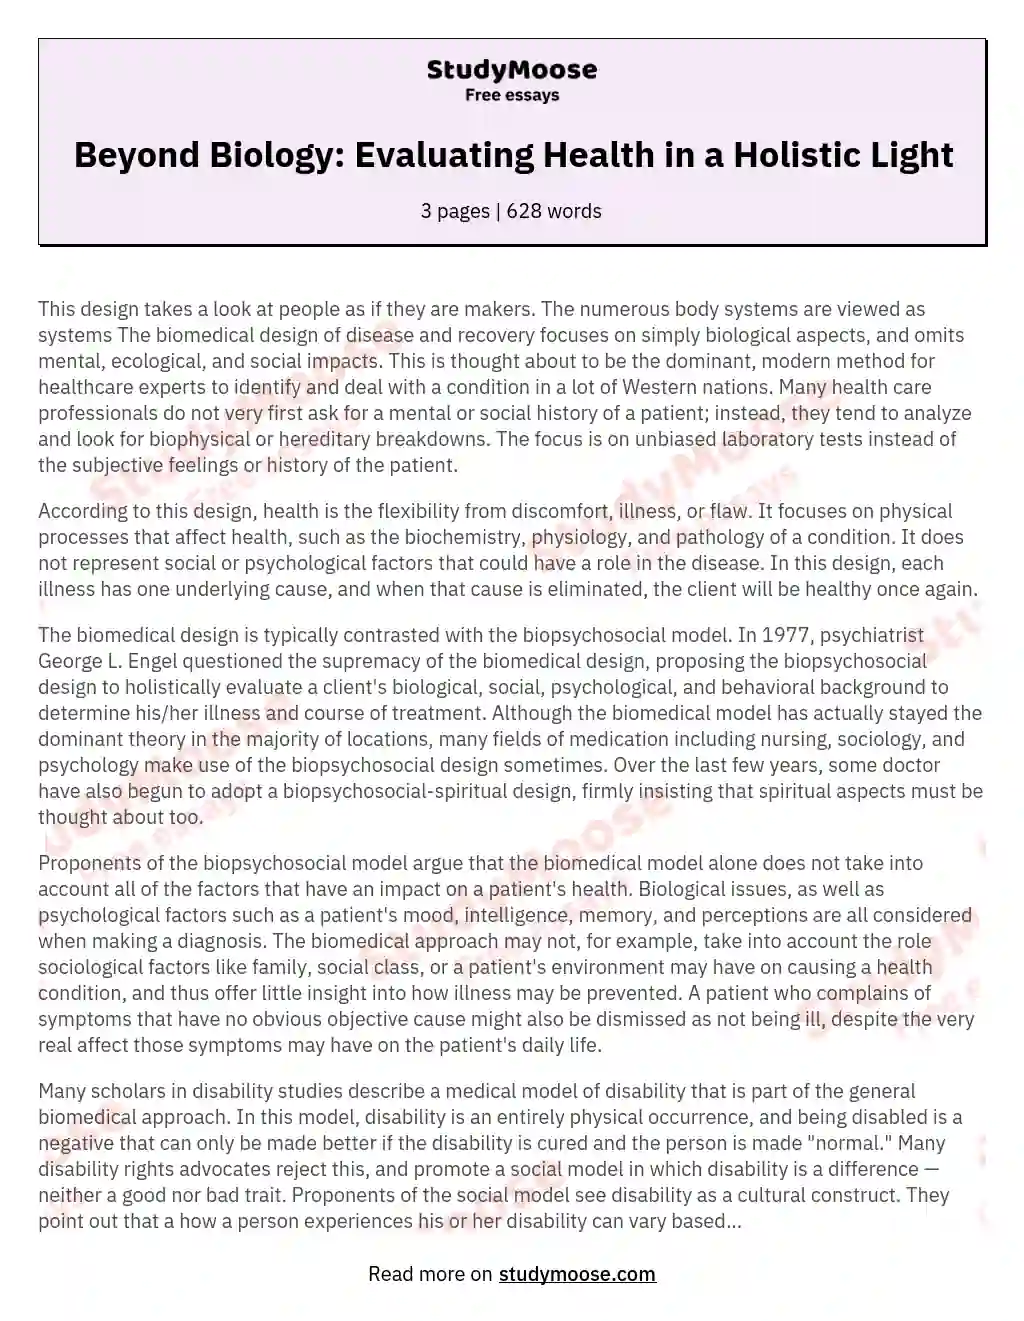 Beyond Biology: Evaluating Health in a Holistic Light essay